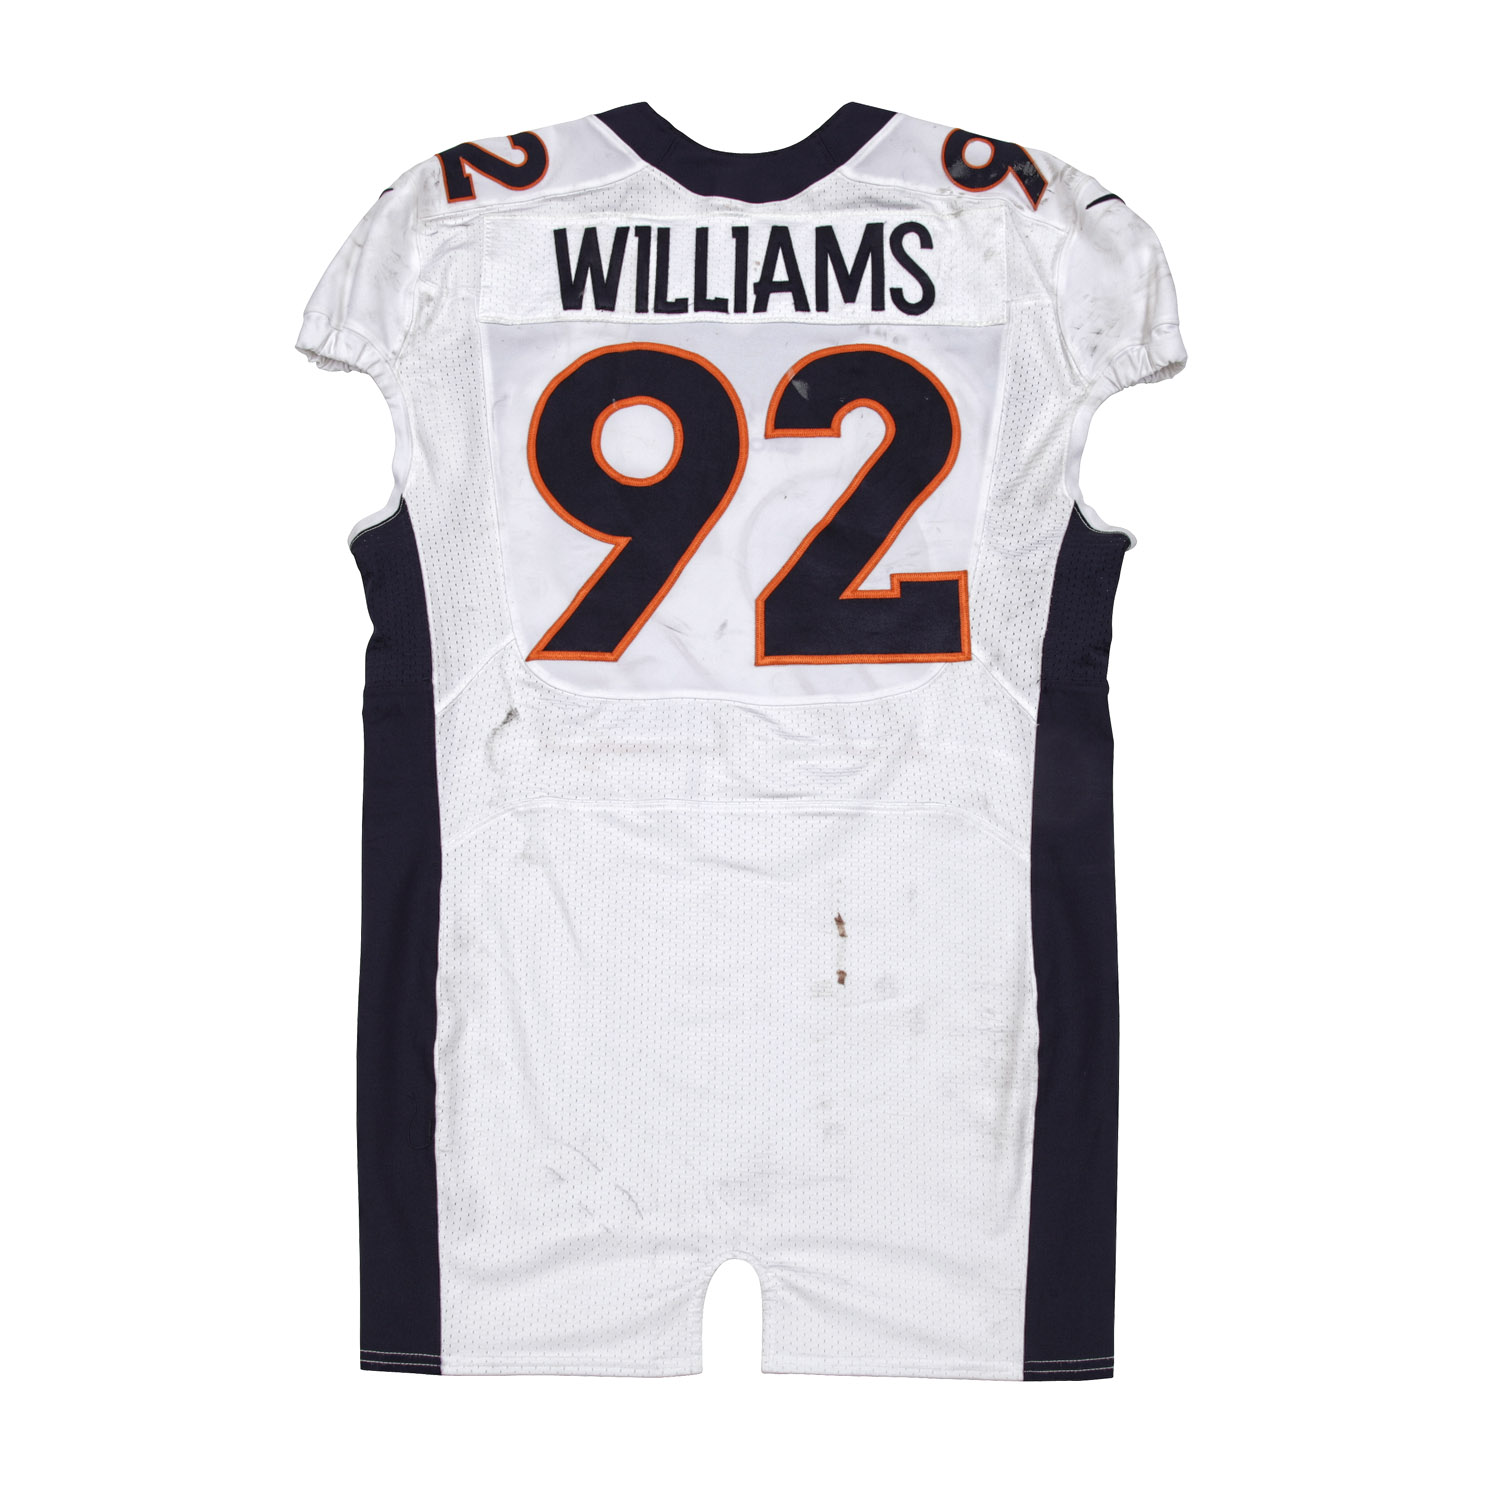 sylvester williams jersey